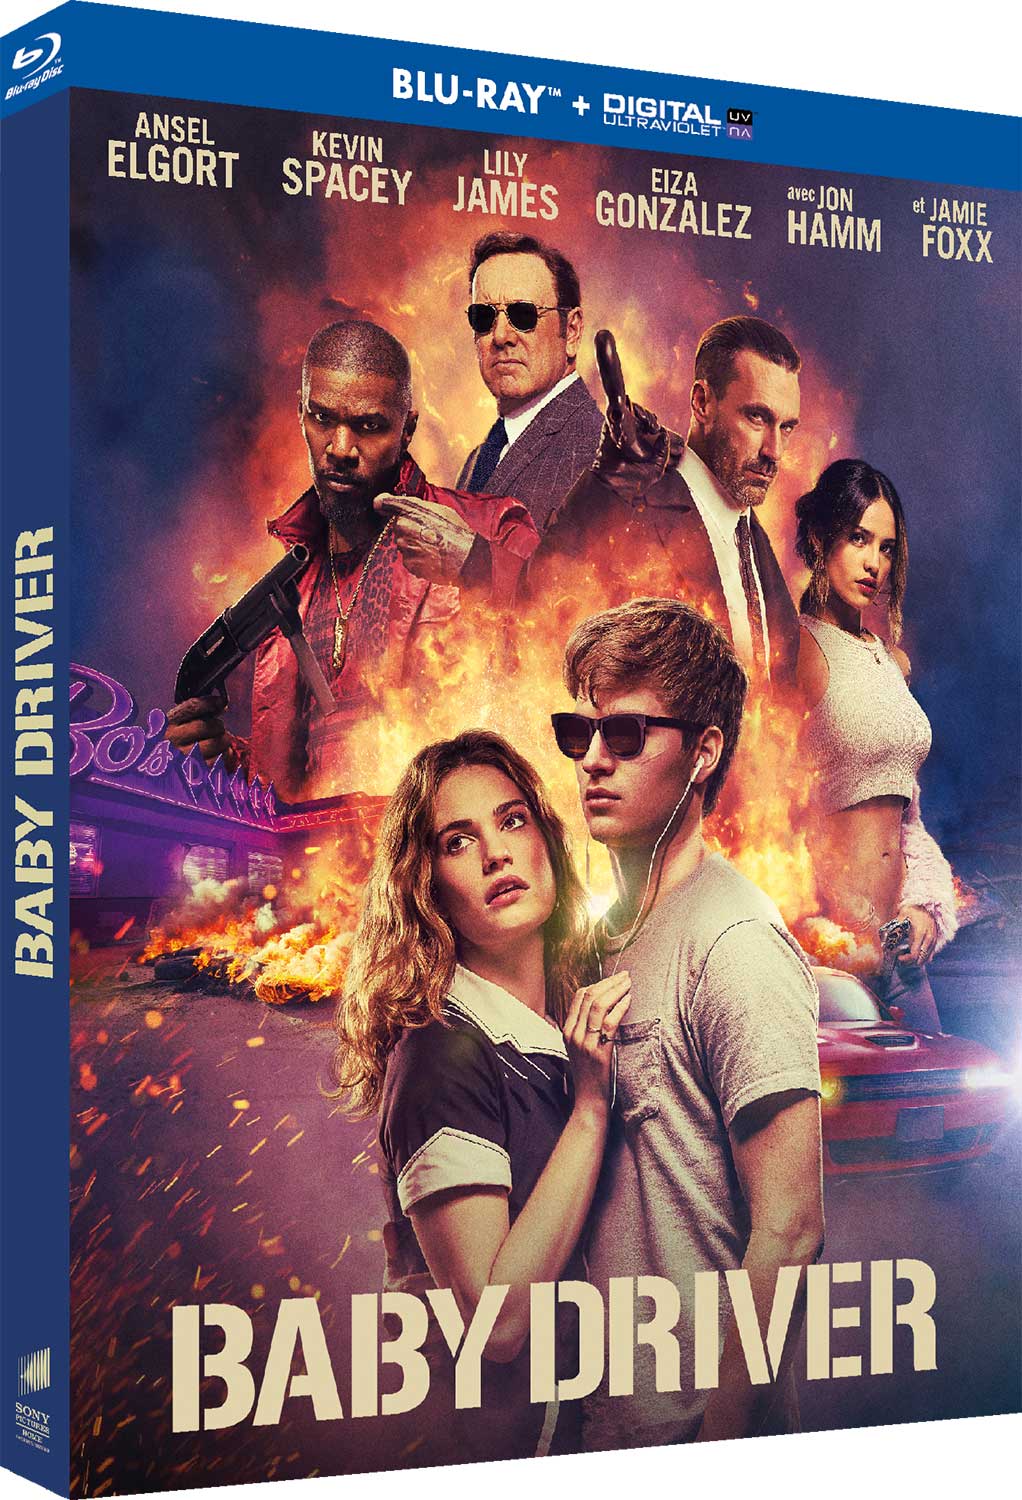 BABY DRIVER - BD